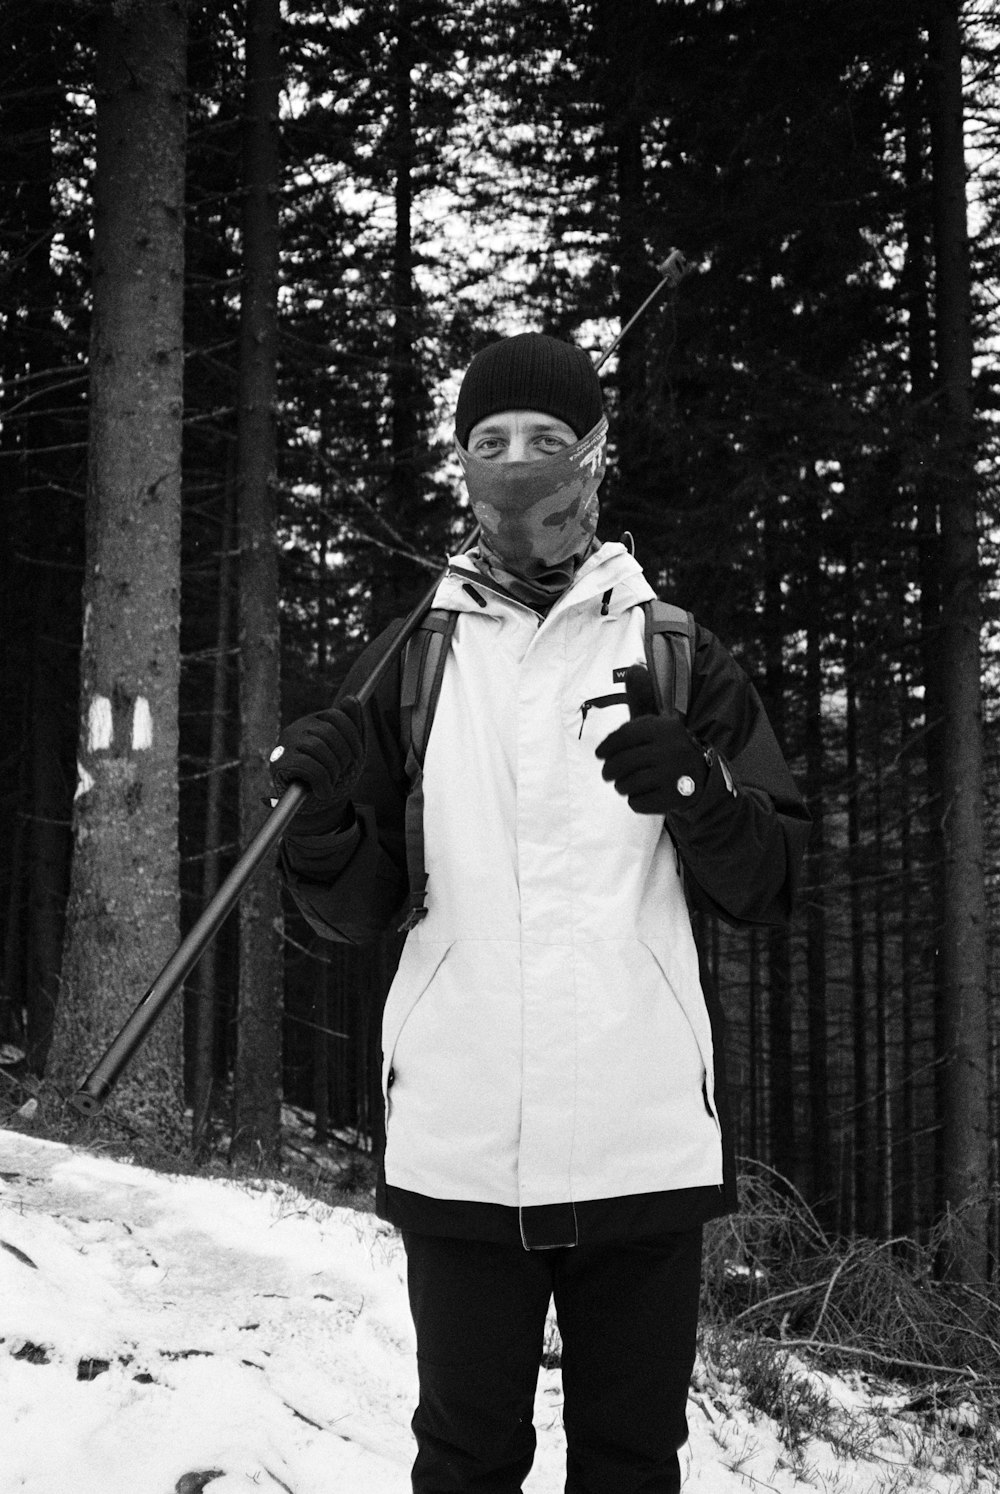 a man standing in the snow holding ski poles